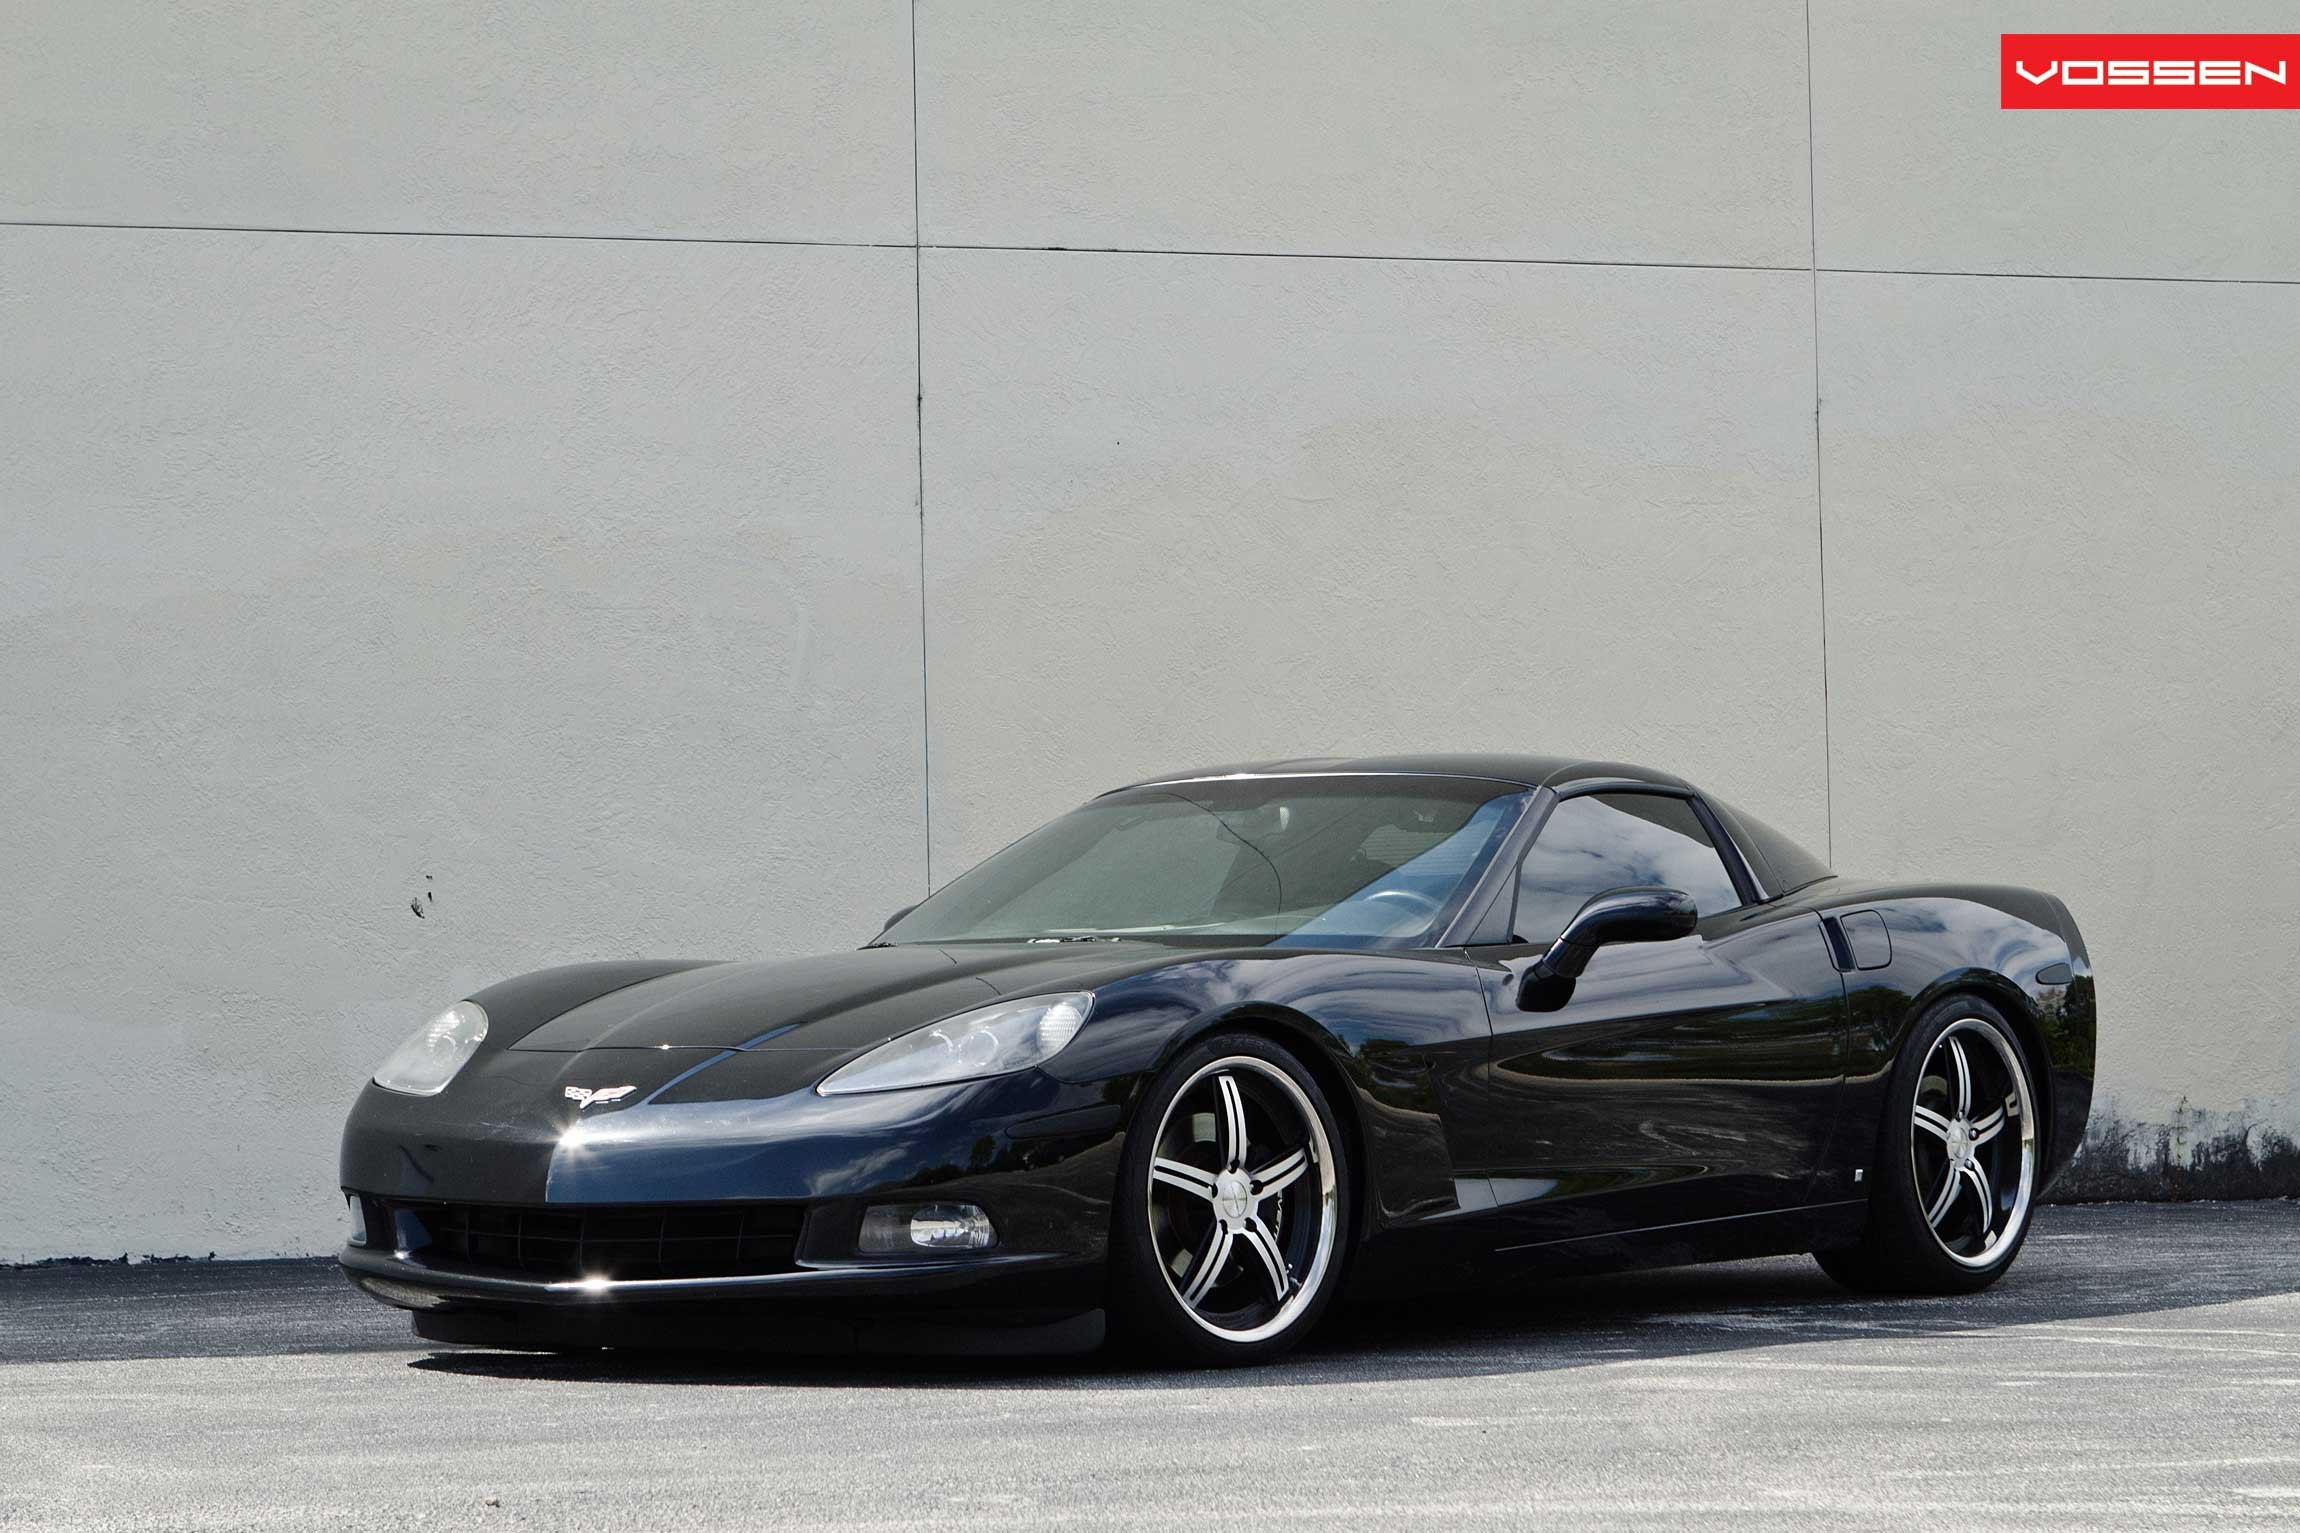 Chevy Corvette with Crystal Clear Headlights - Photo by Vossen